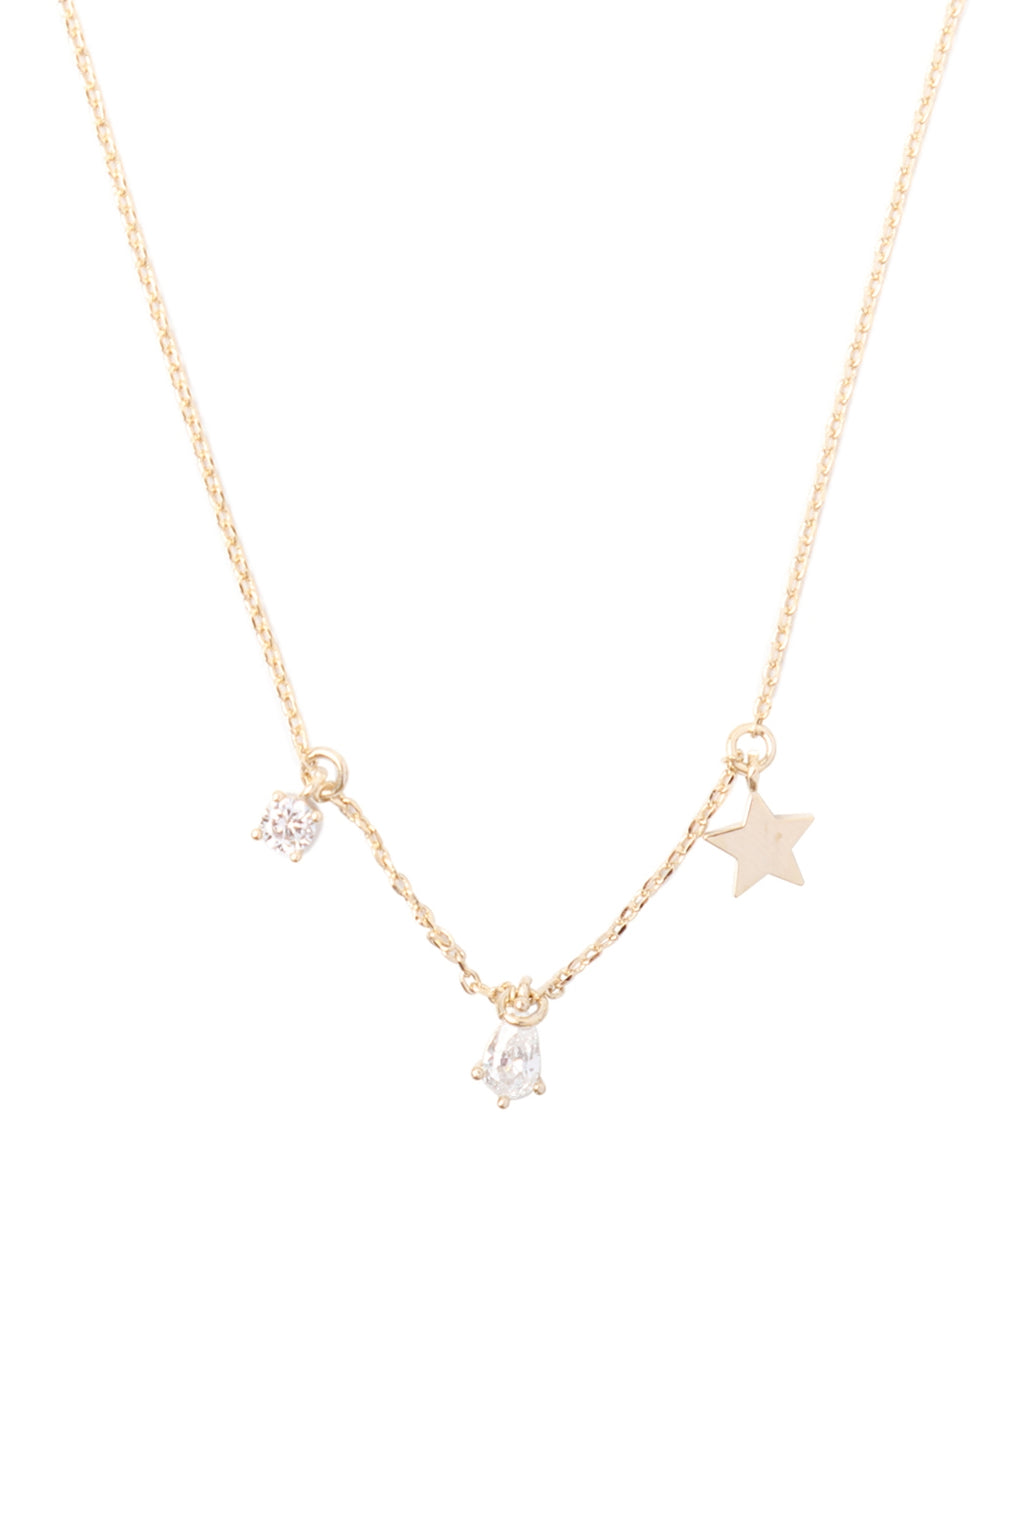 - Charm Star Rhinestone Chain Necklace Gold Crystal - Pack of 6